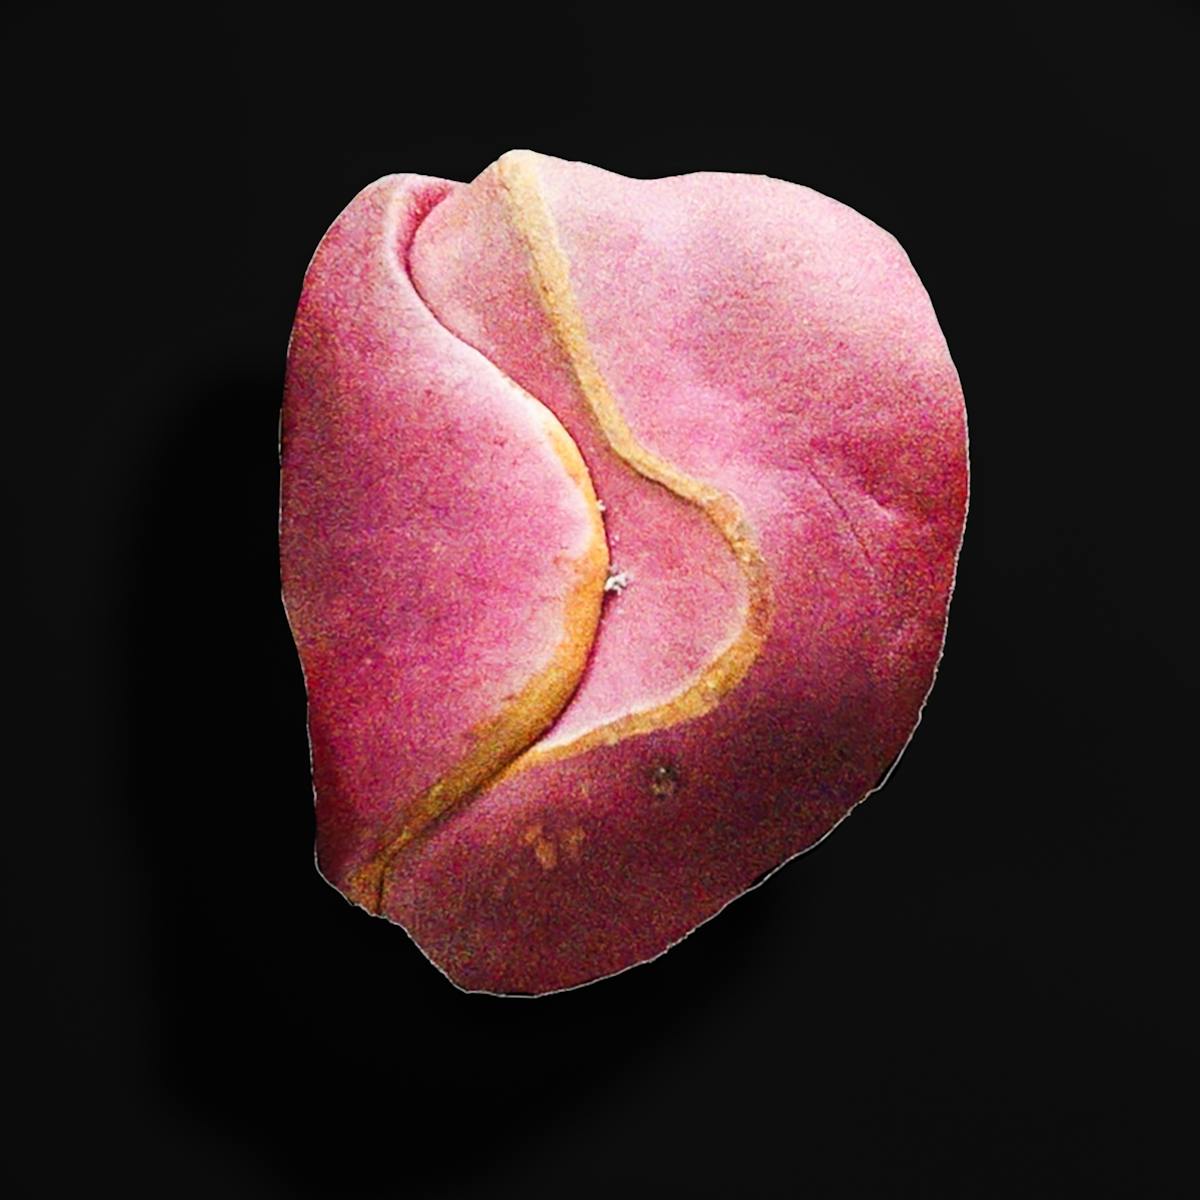 Still image from a film, showing a pinky-red kola nut floating above a black background.